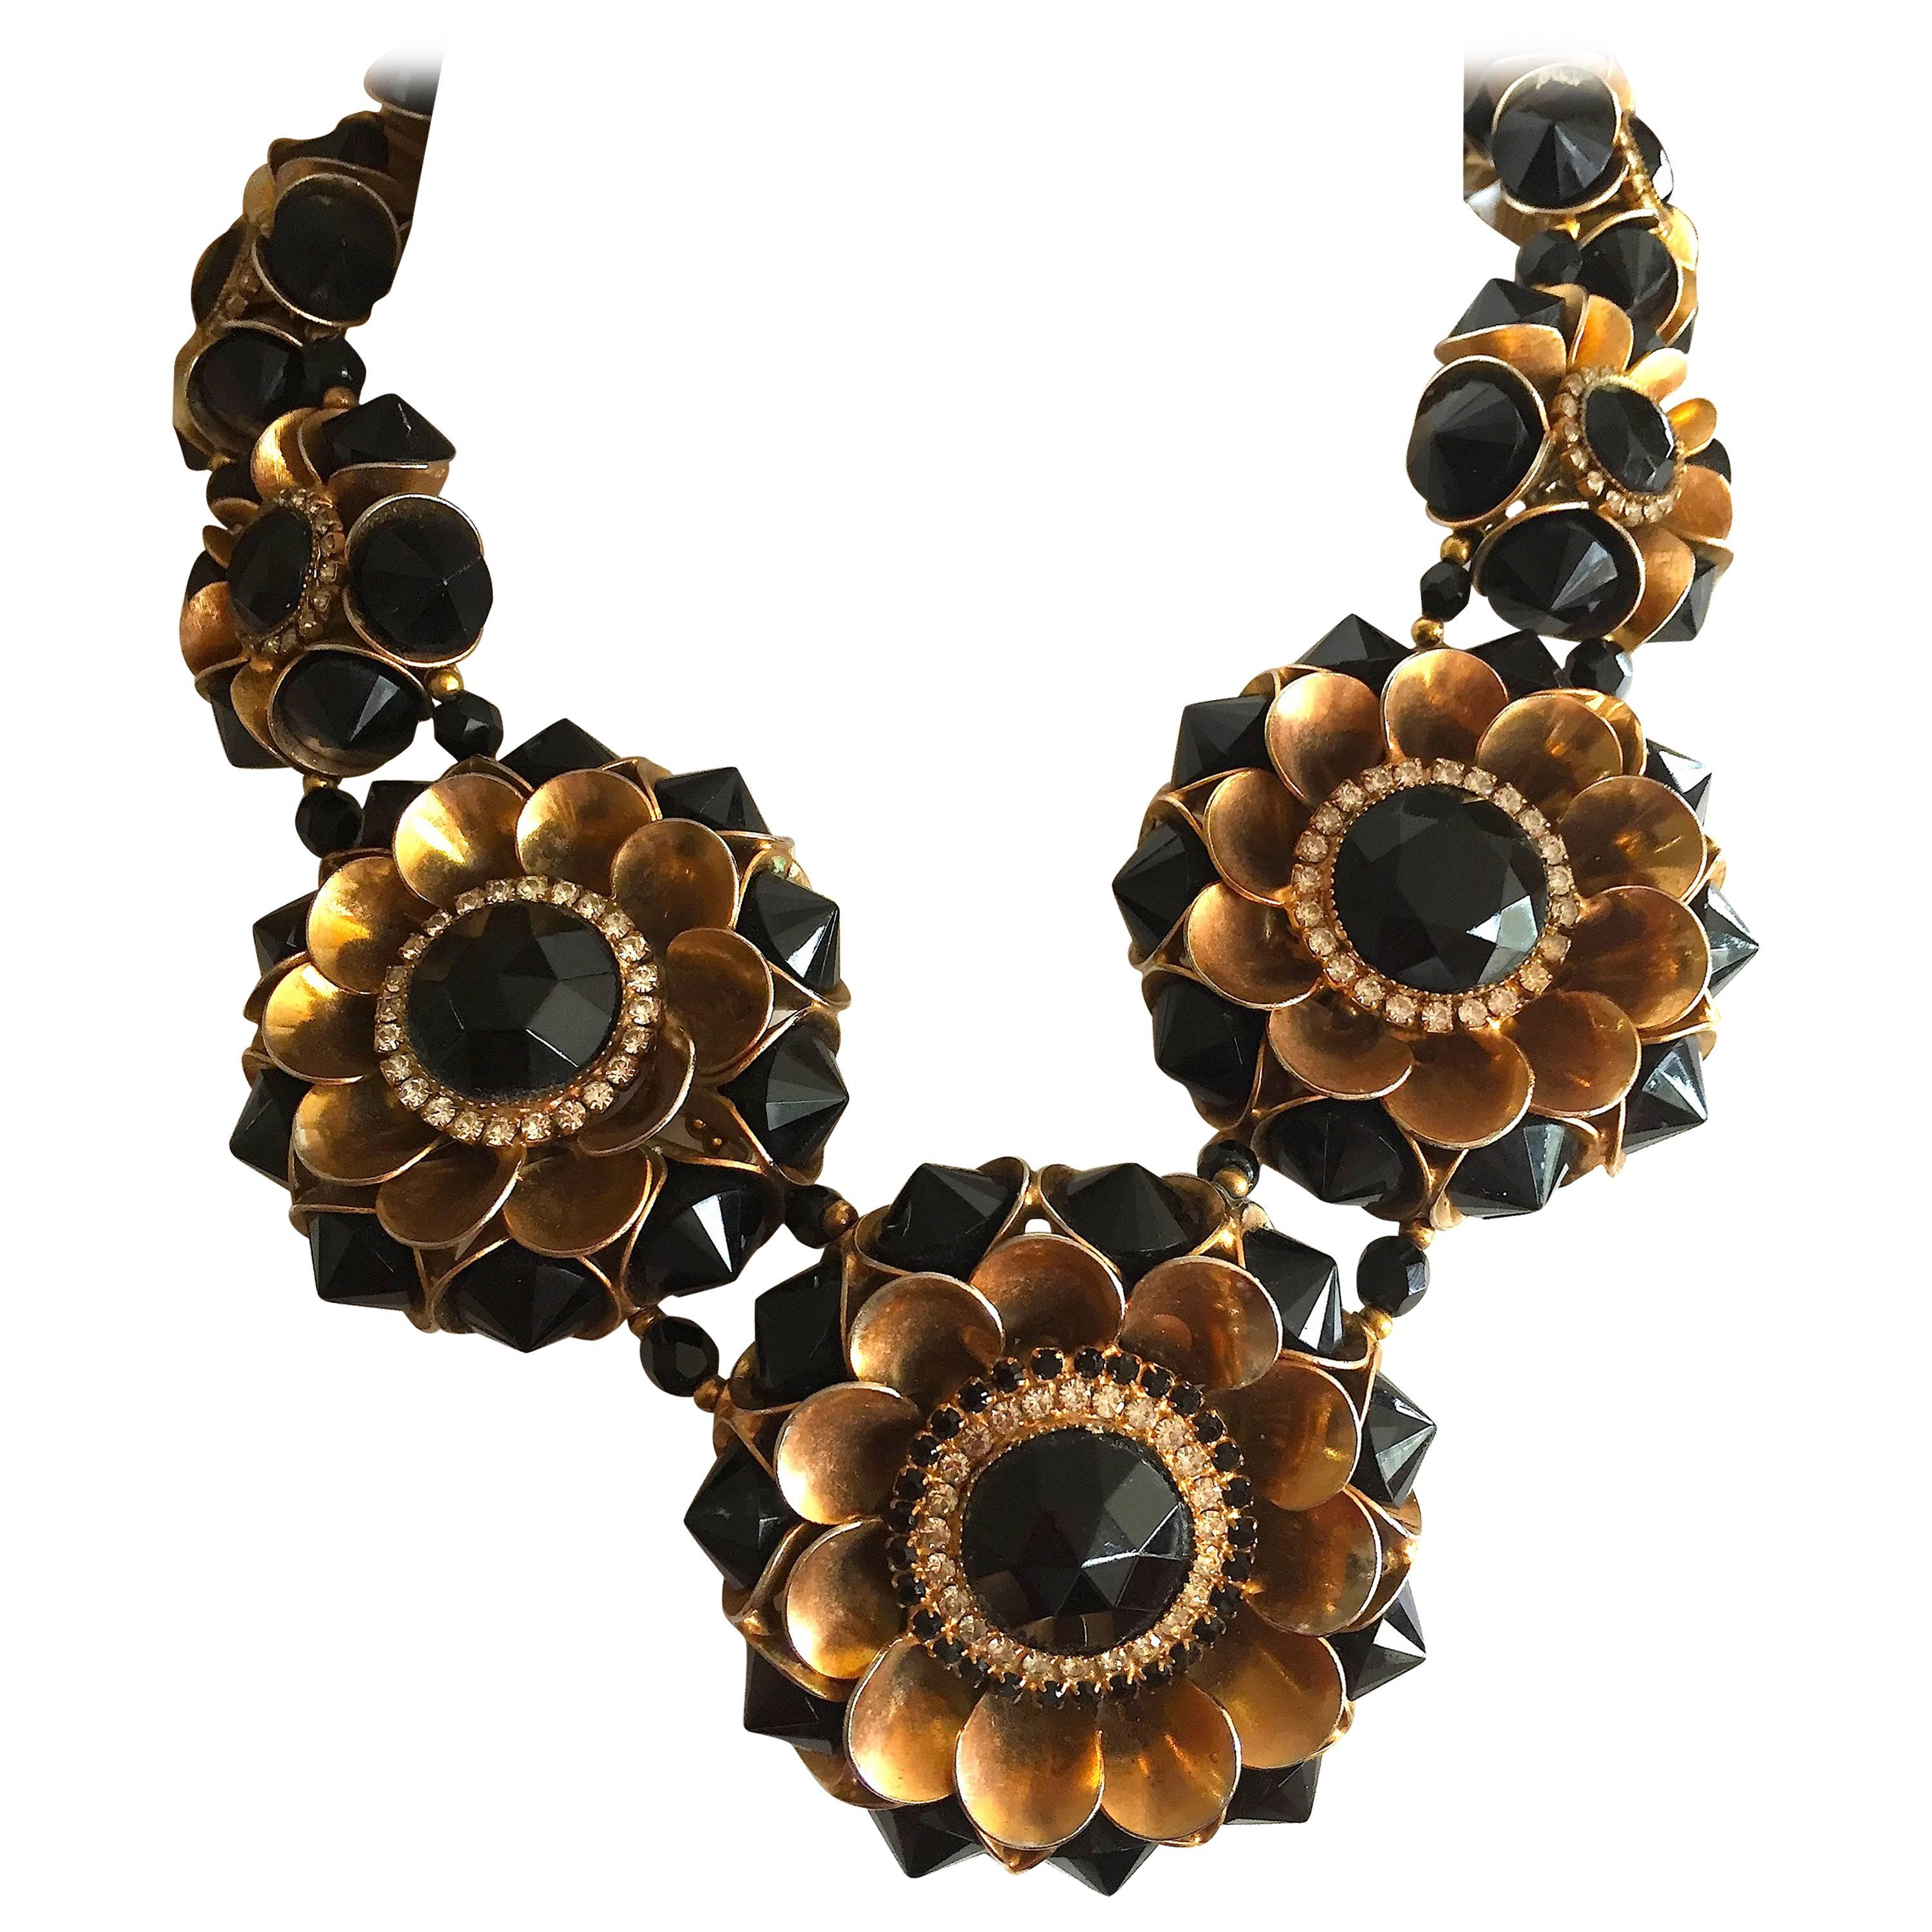 William De Lillo Bold 1970's Graduating Floral Necklace with Jet and Crystal